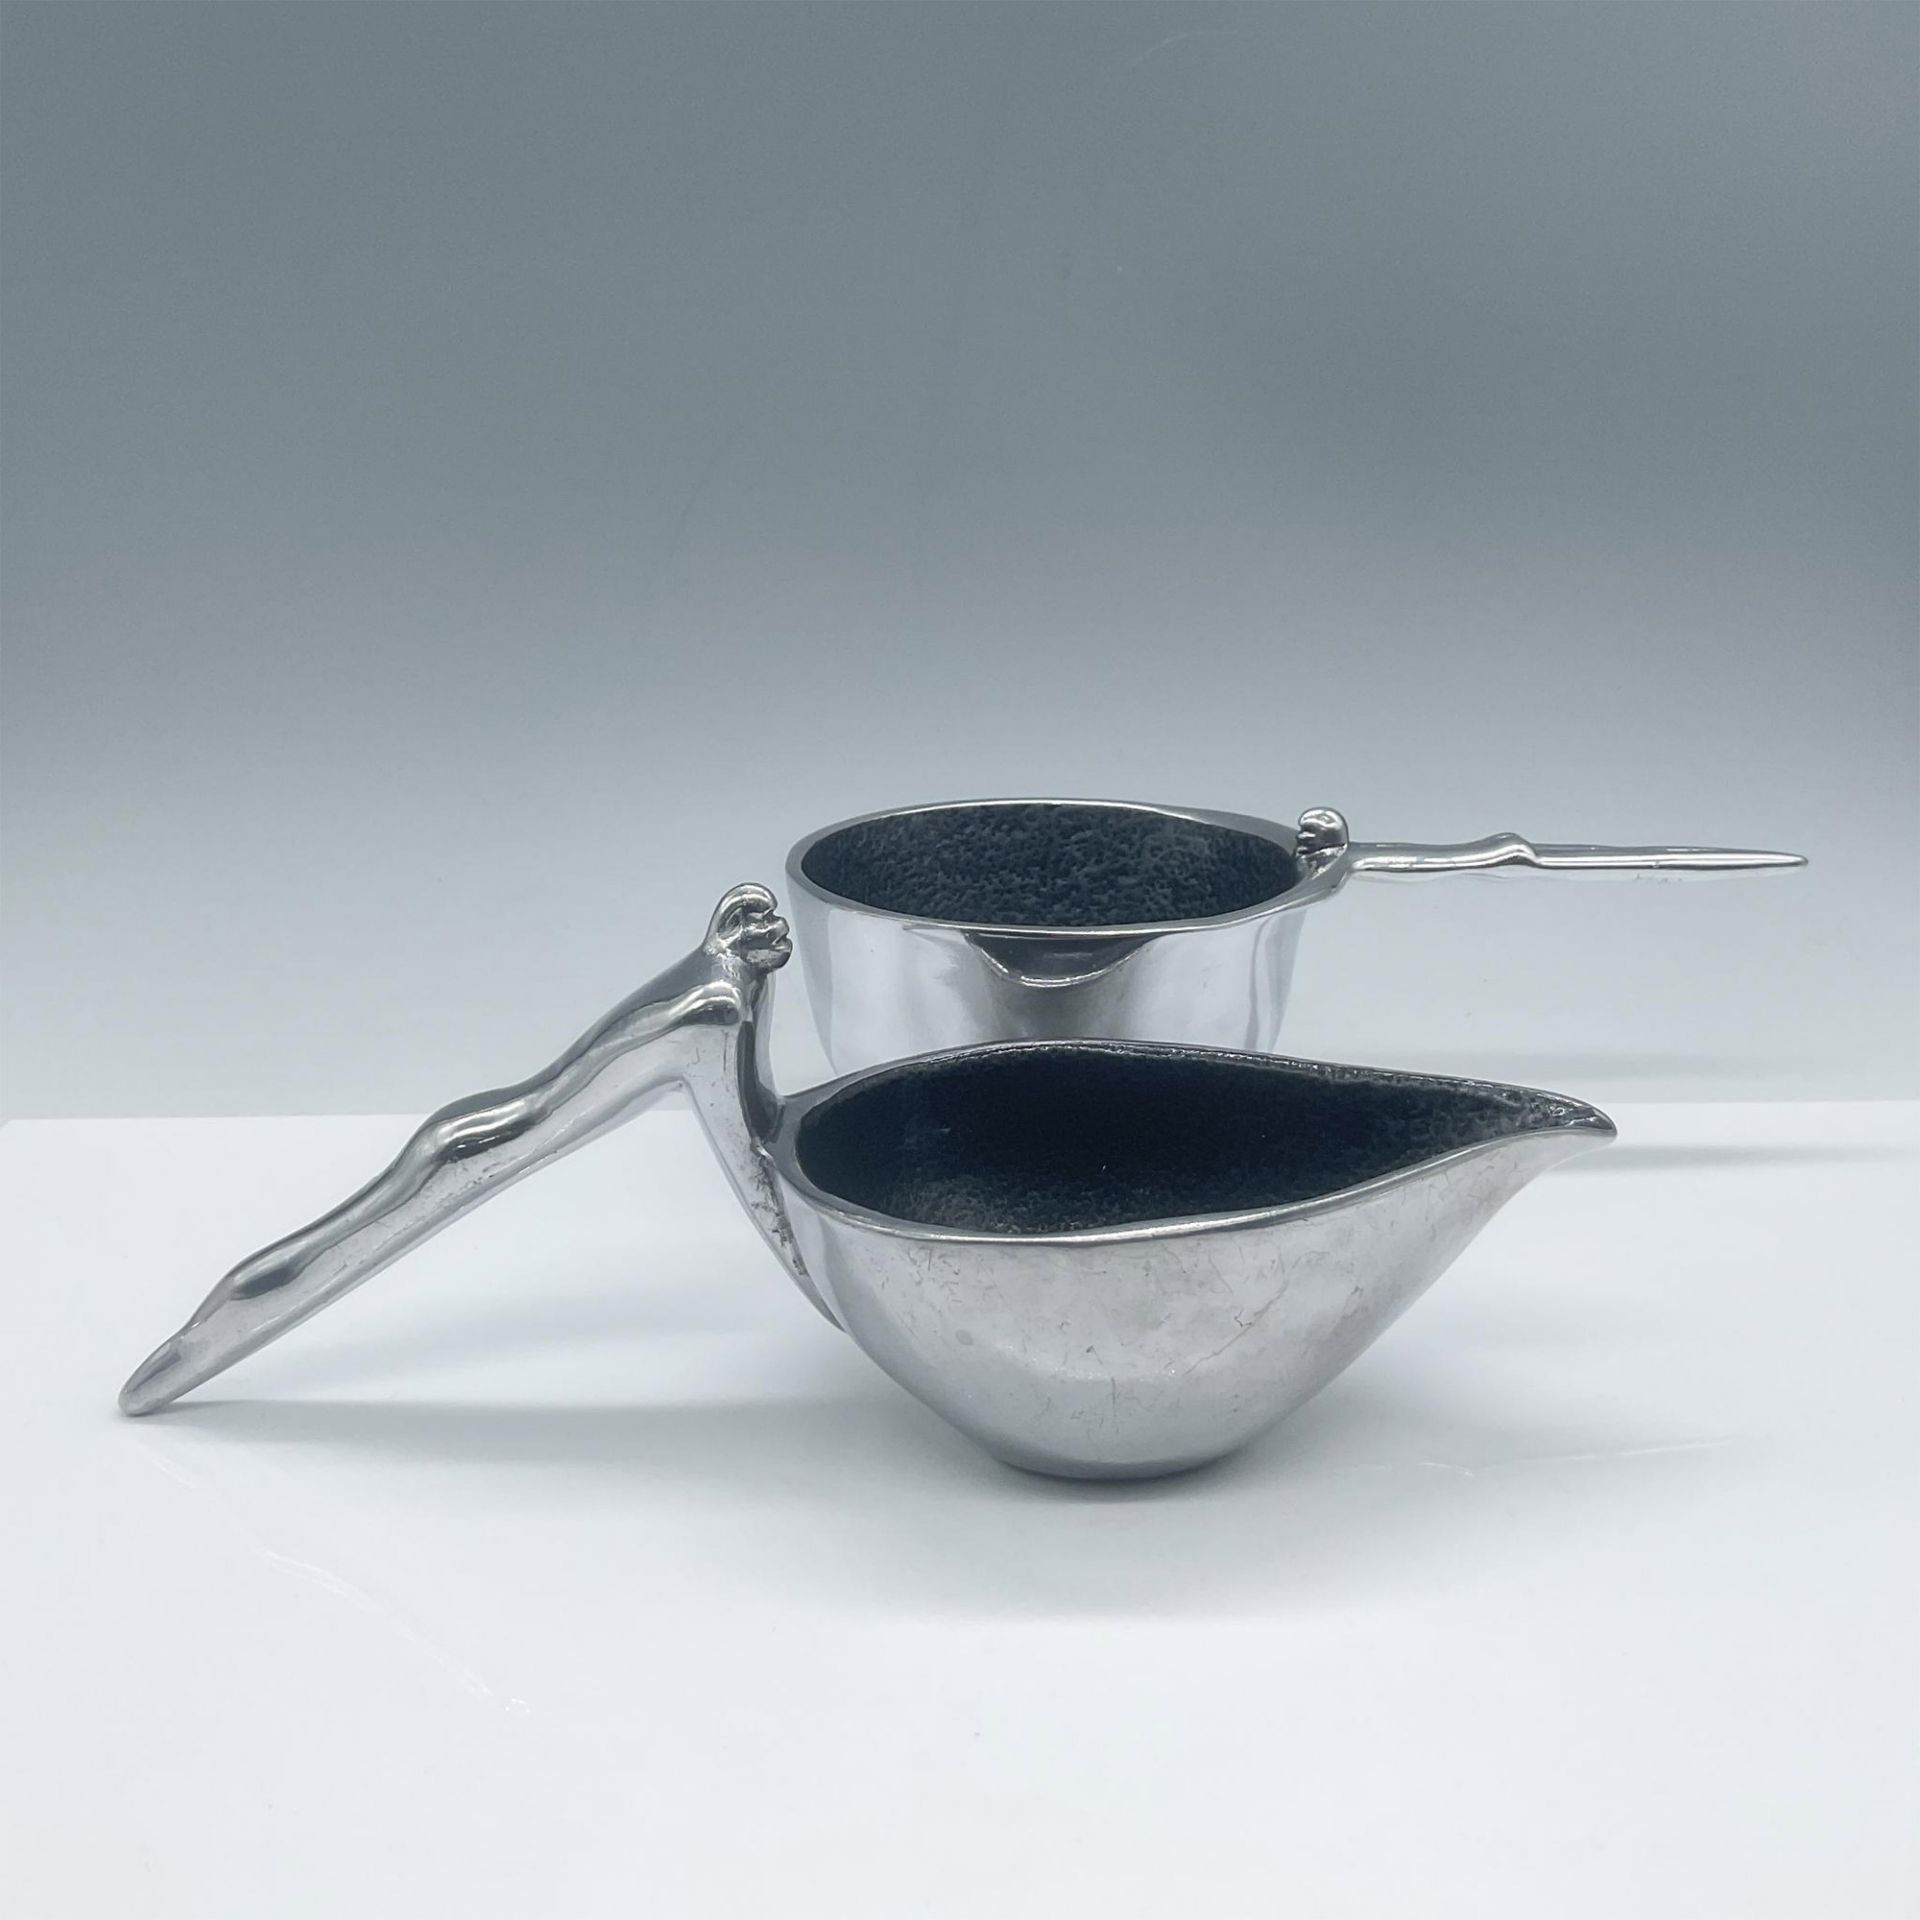 2pc Carrol Boyes Aluminum Sauce Boat and Bowl, Acrobats - Image 3 of 6